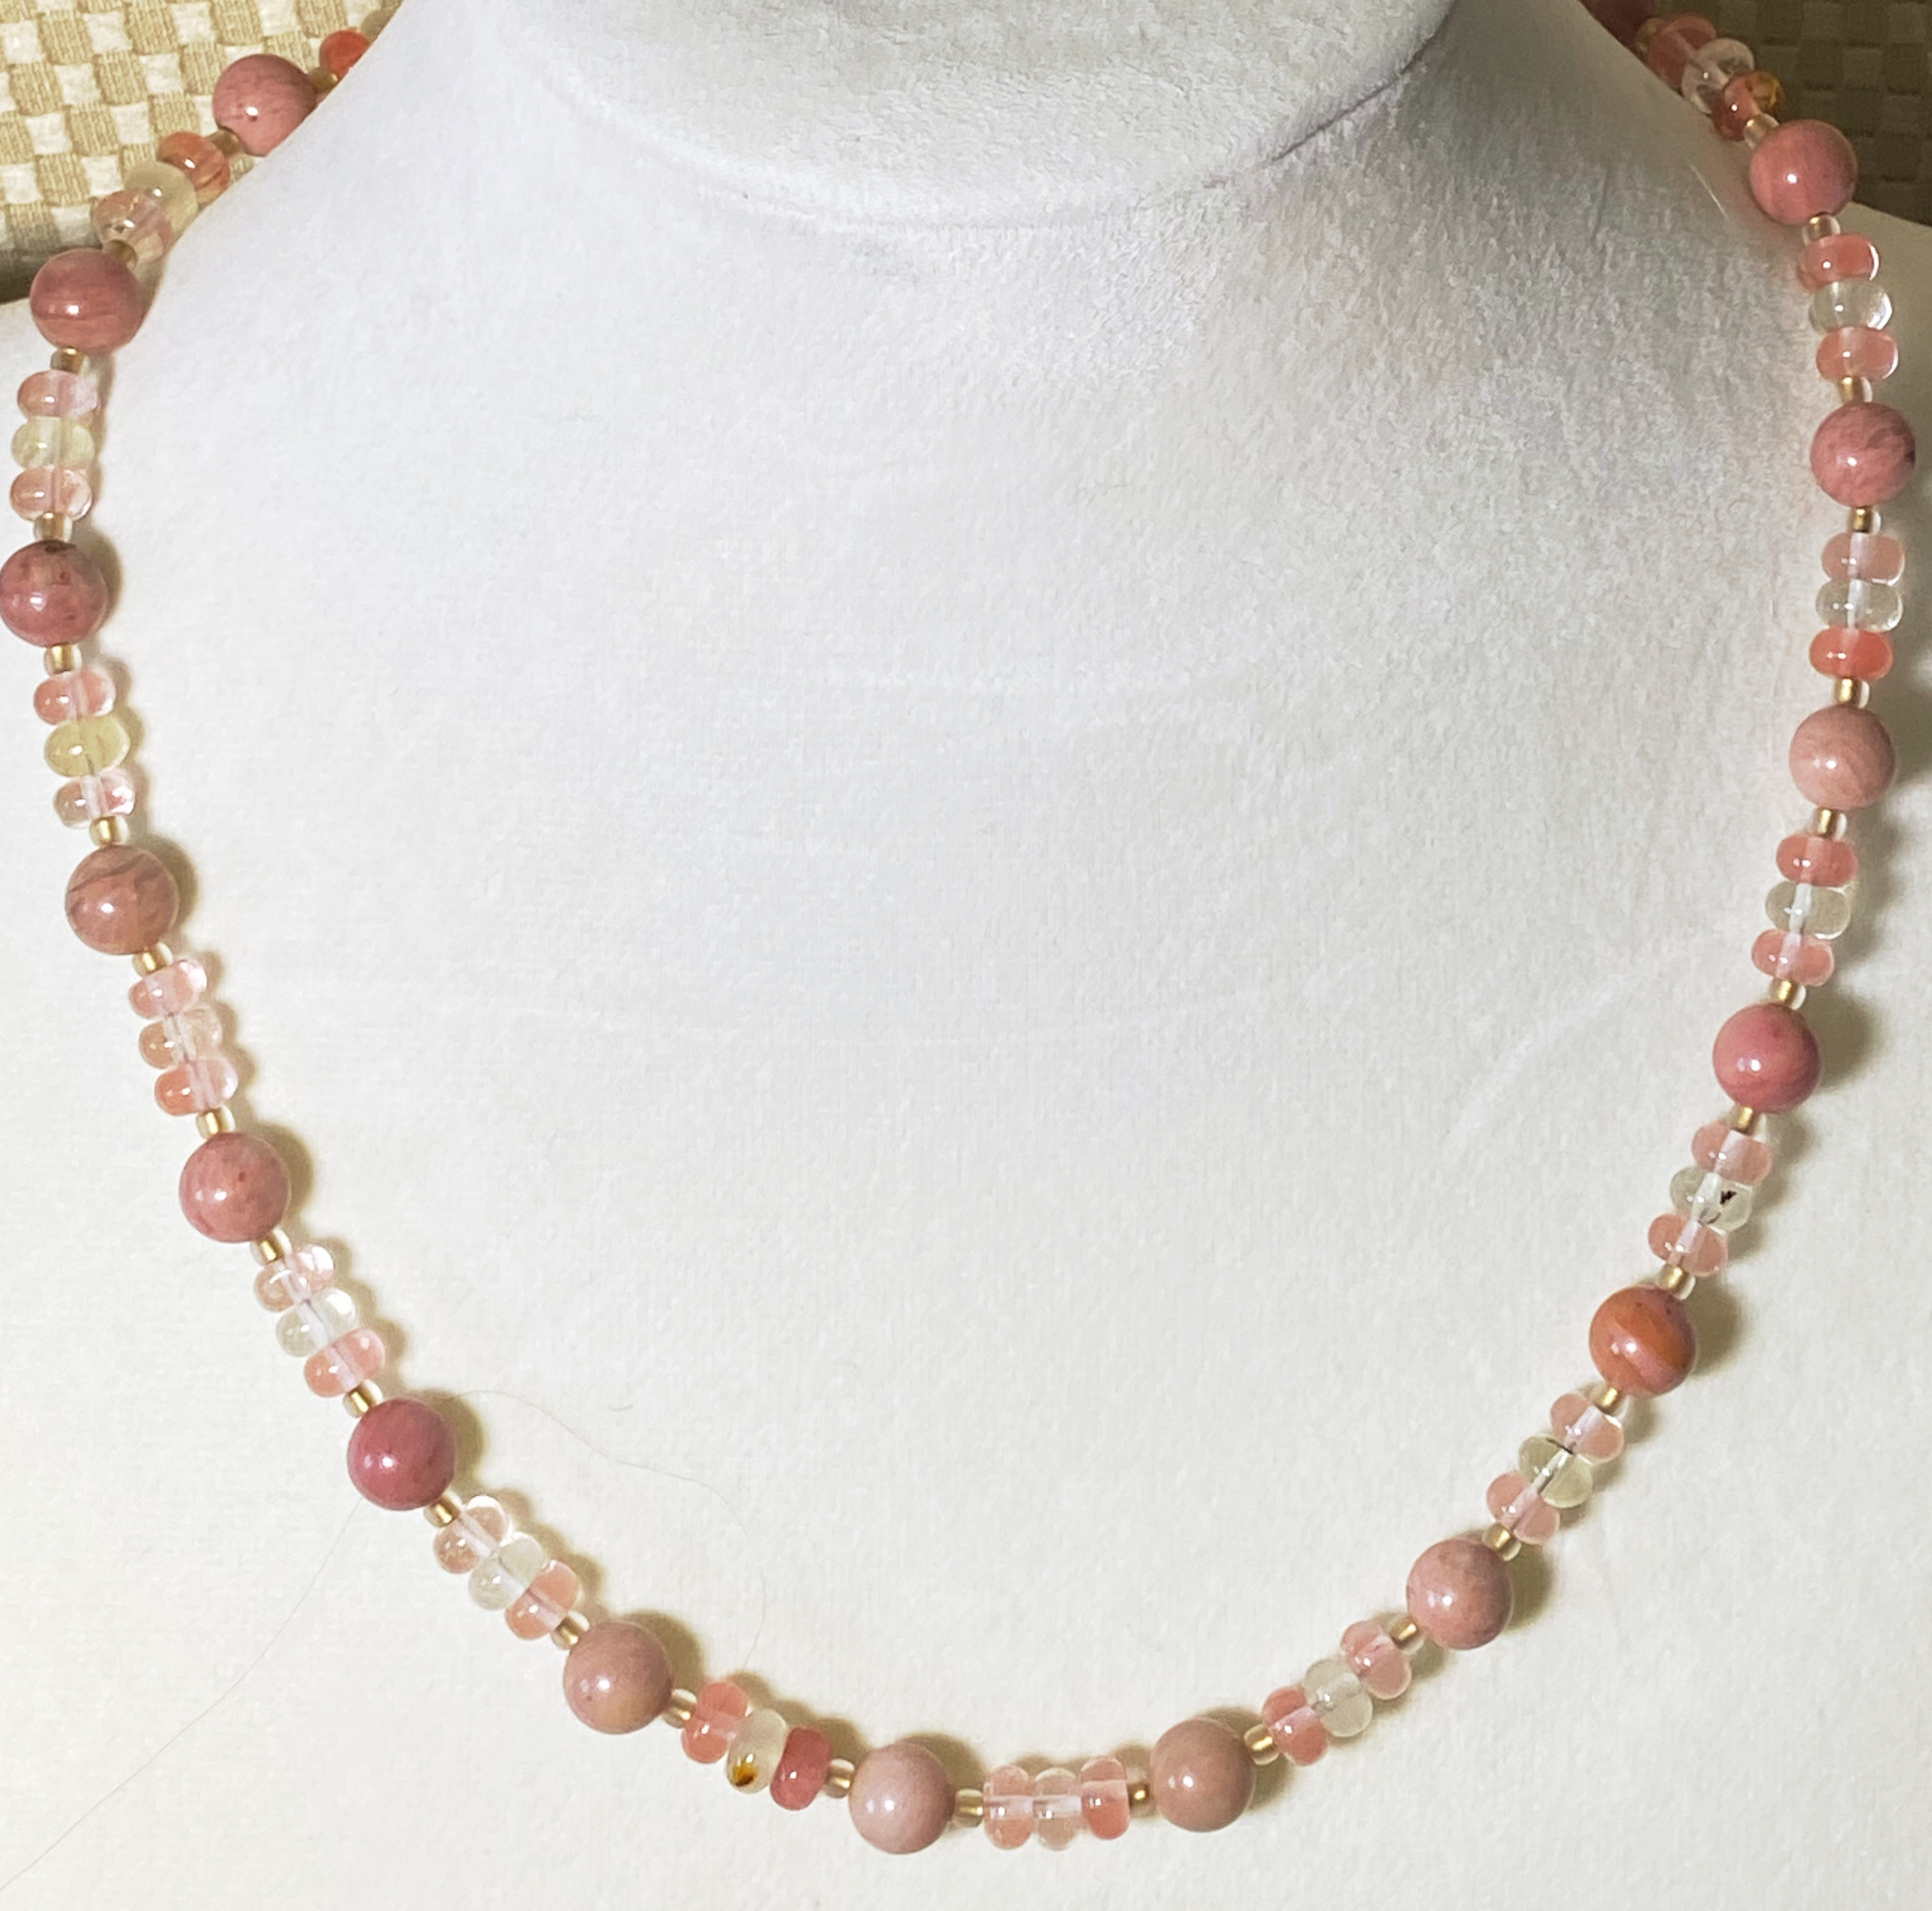 Picture of Pink Rhodonite and Quartz Necklace